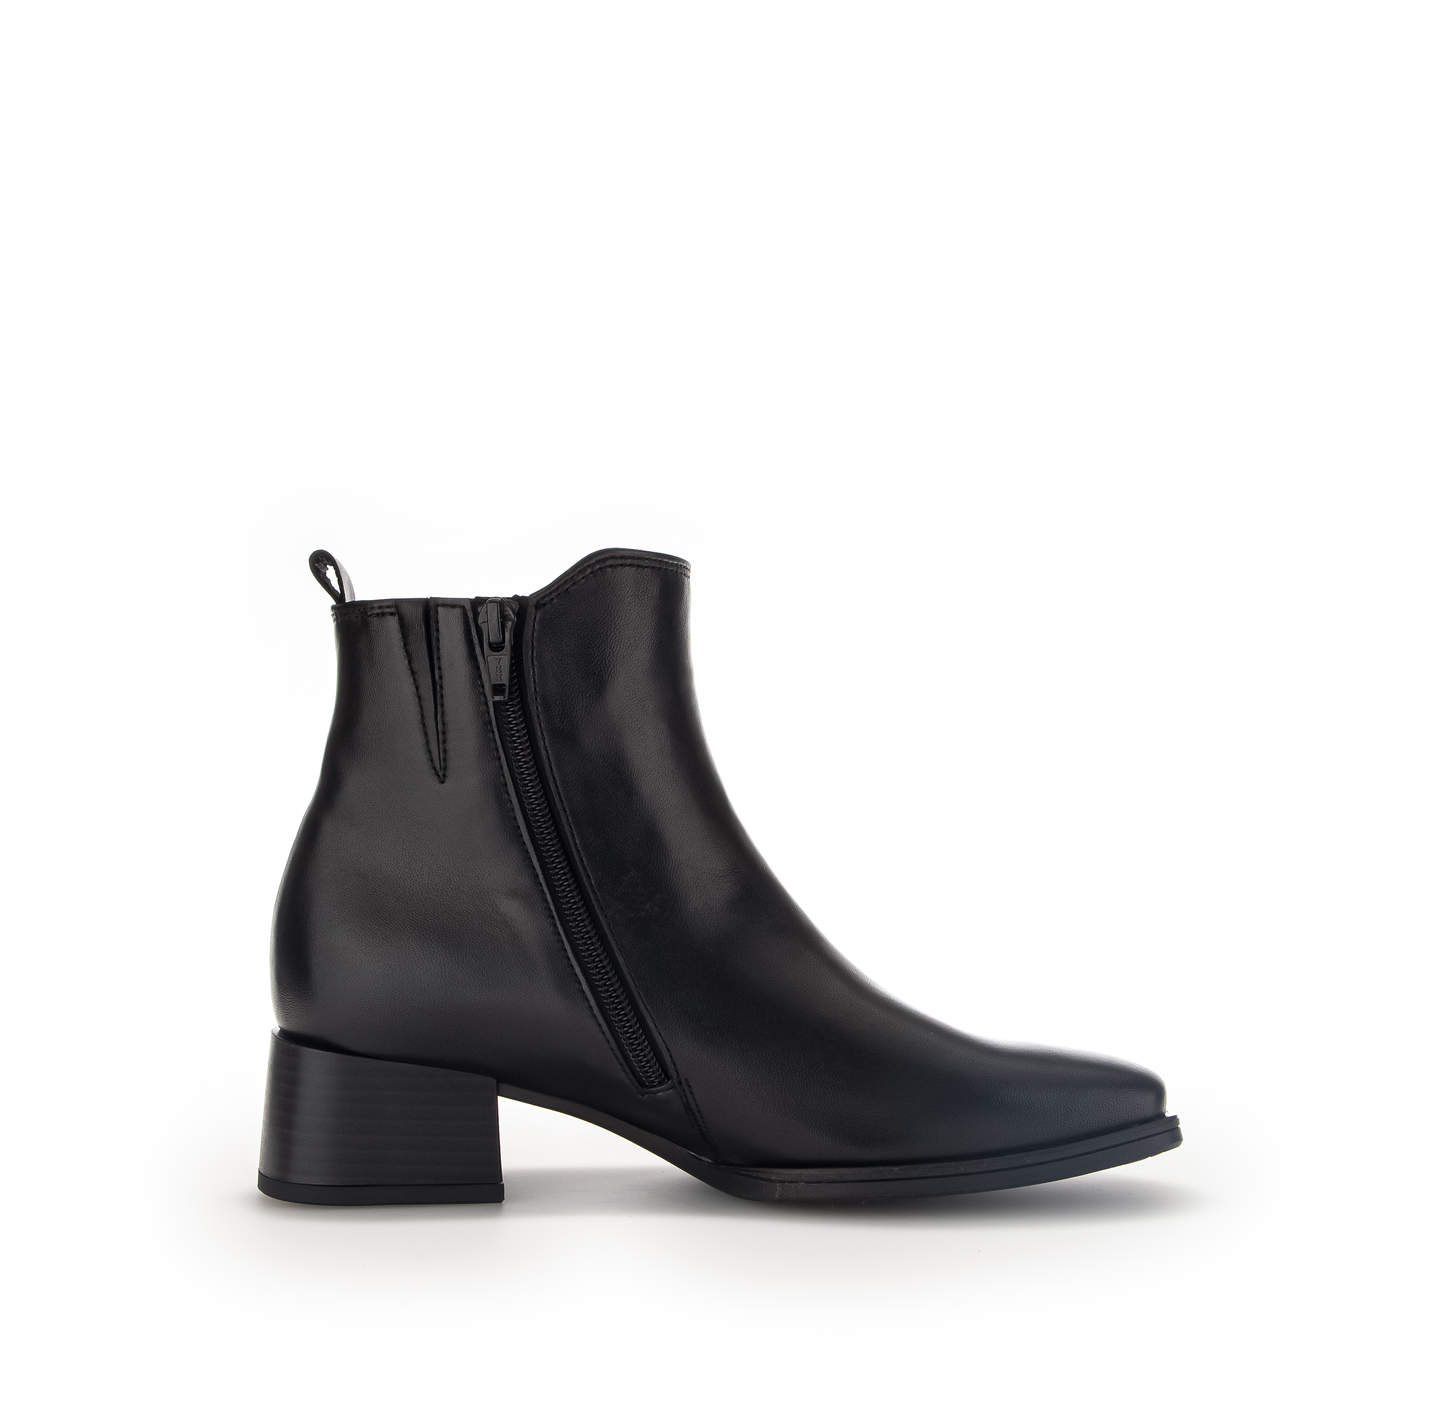 Gabor 32.922.27 Comfort Black Ankle Boots with Twin Zips